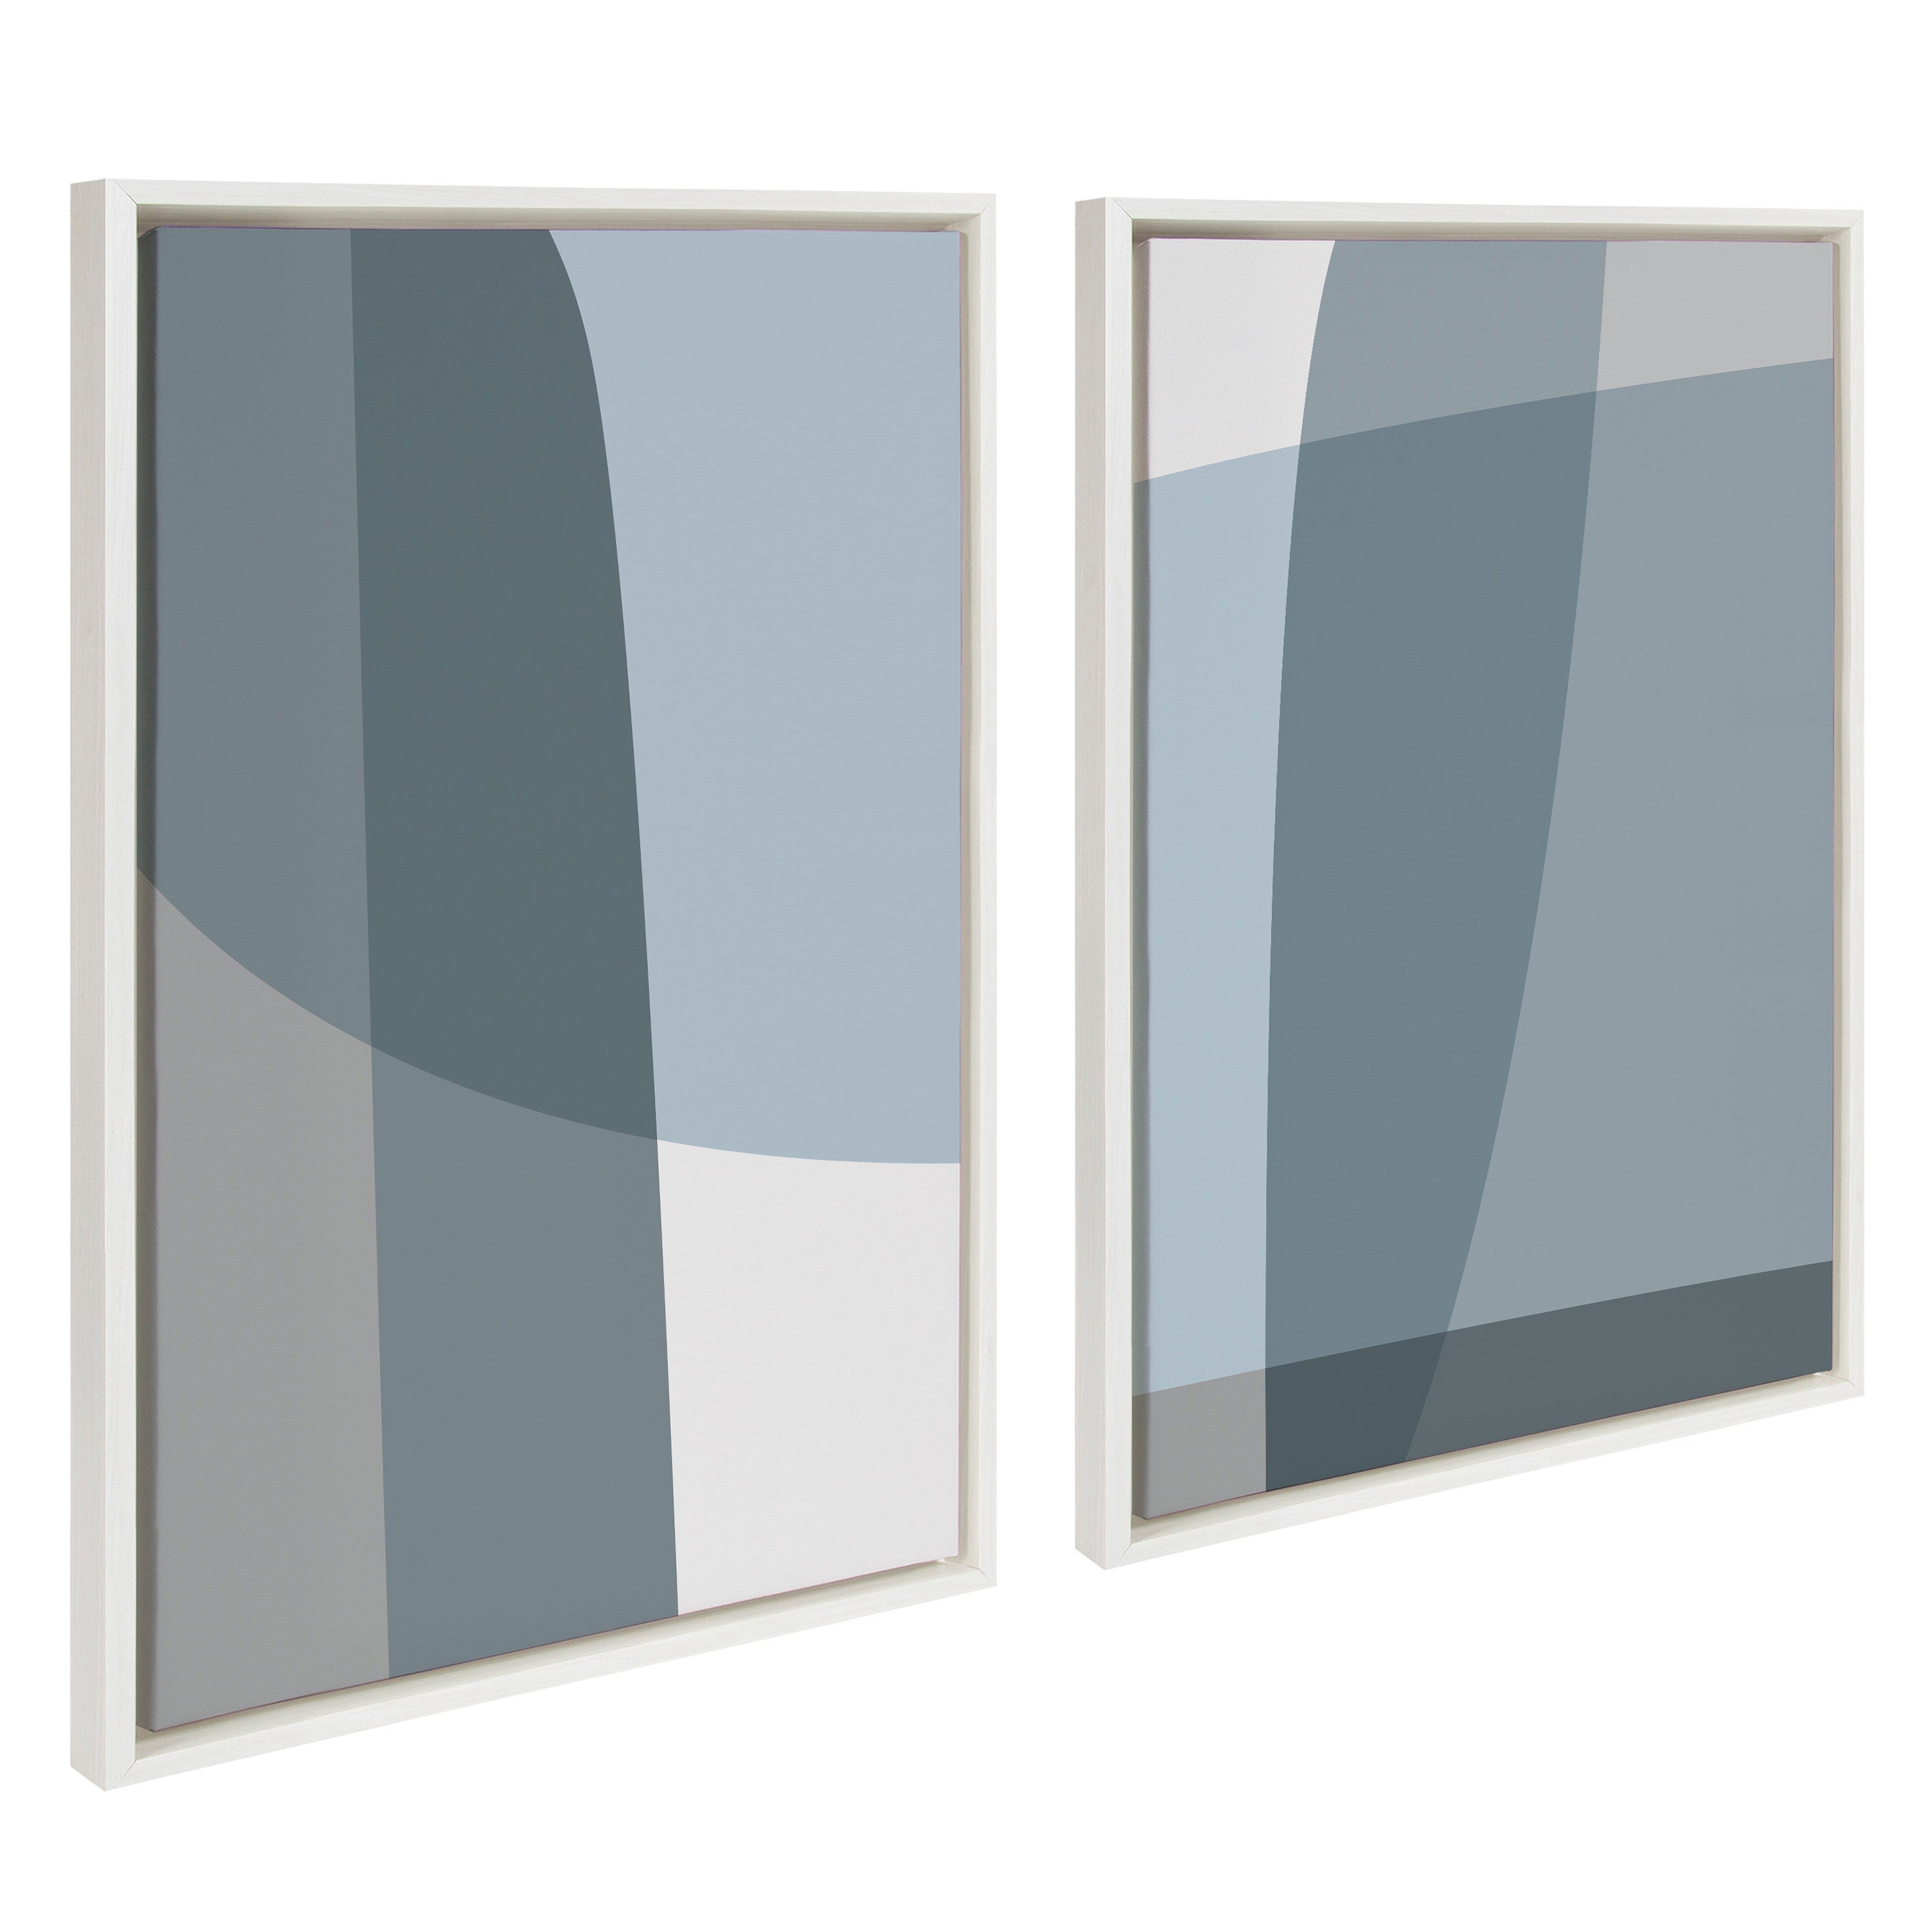 Sylvie Zen Abstract Blue and Gray Stones No 1 and No 2 Framed Canvas by The Creative Bunch Studio